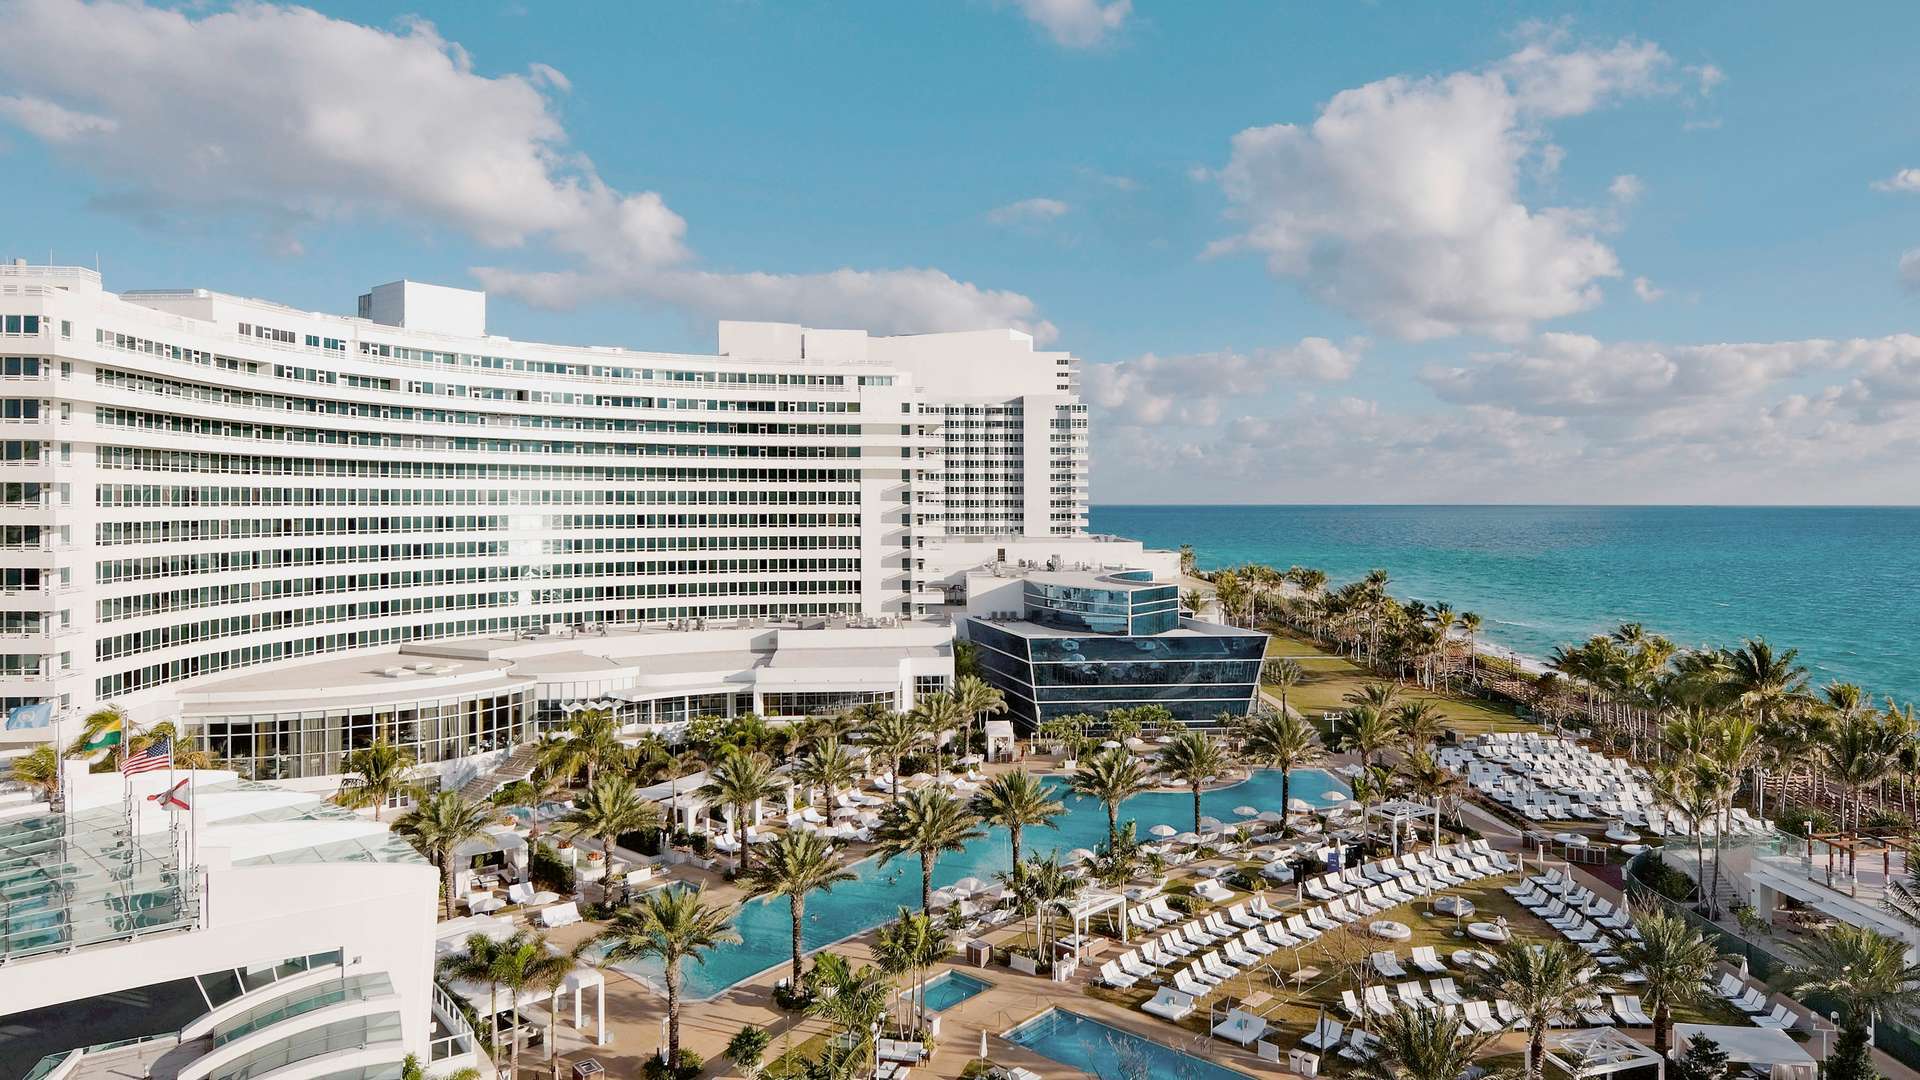 The Hotel Architecture of the Fontainebleau Miami Beach ADG Lighting